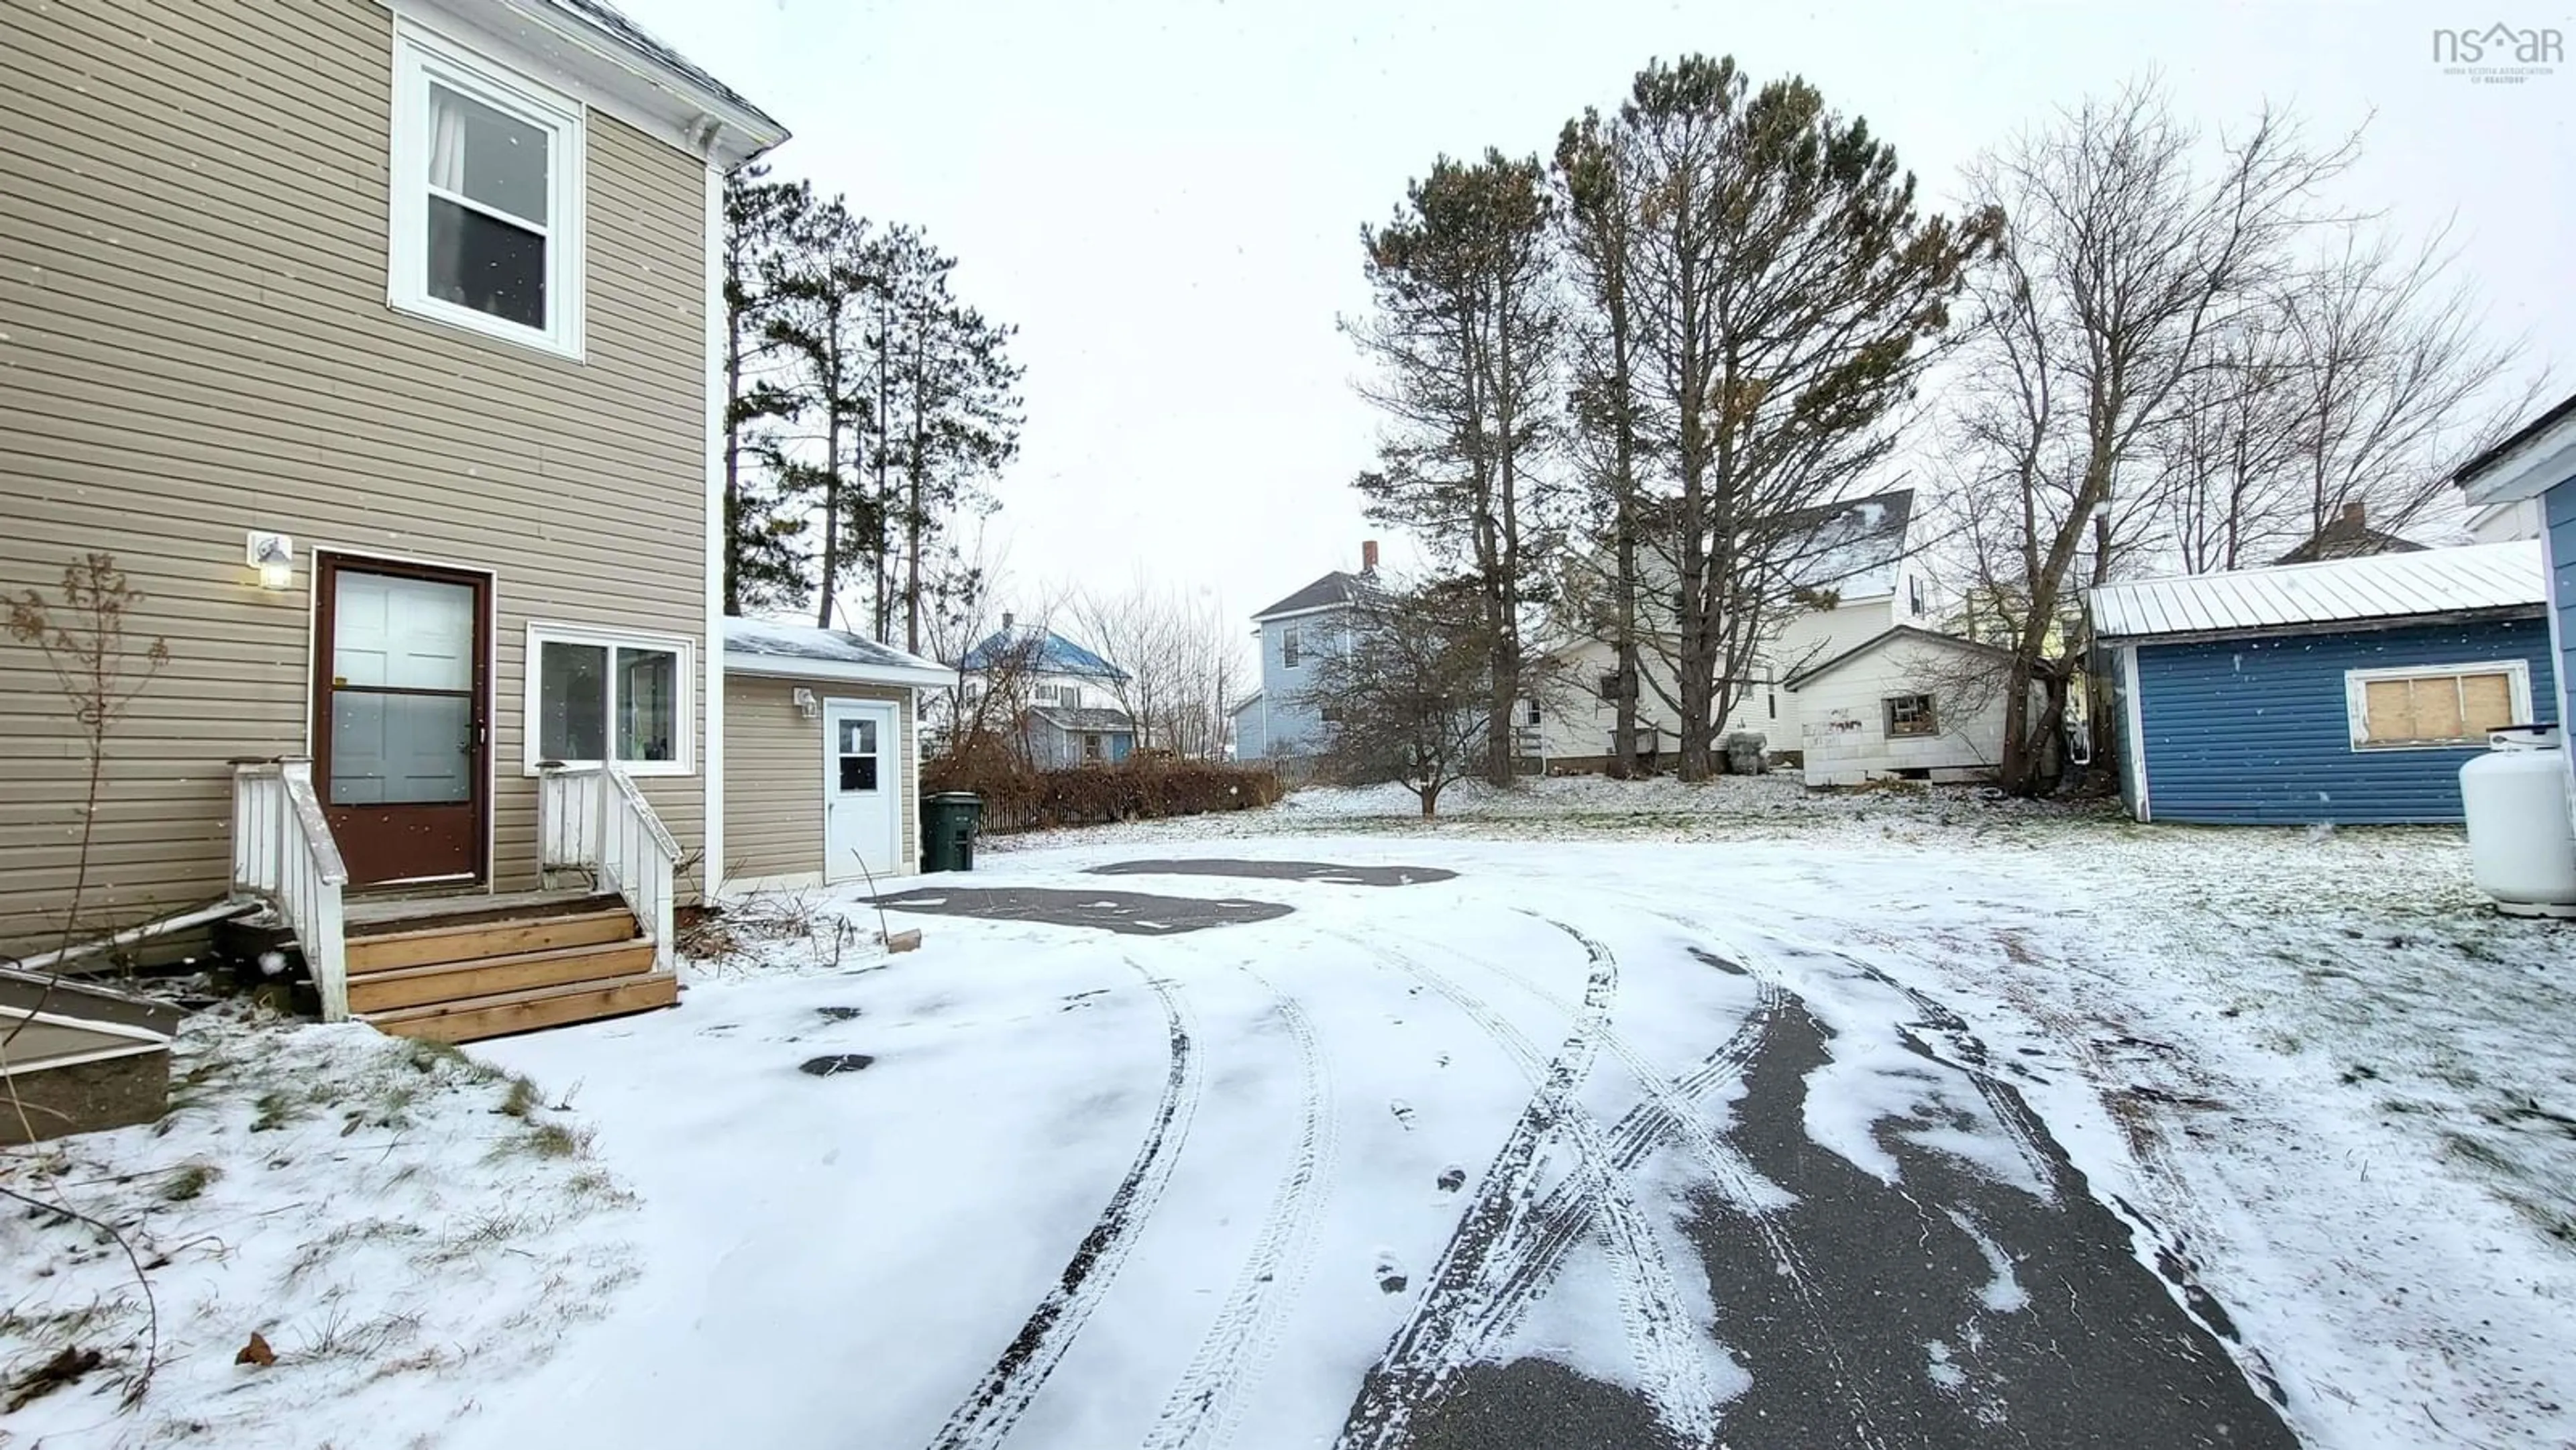 A pic from exterior of the house or condo for 76 Havelock St, Amherst Nova Scotia B4H 3K6